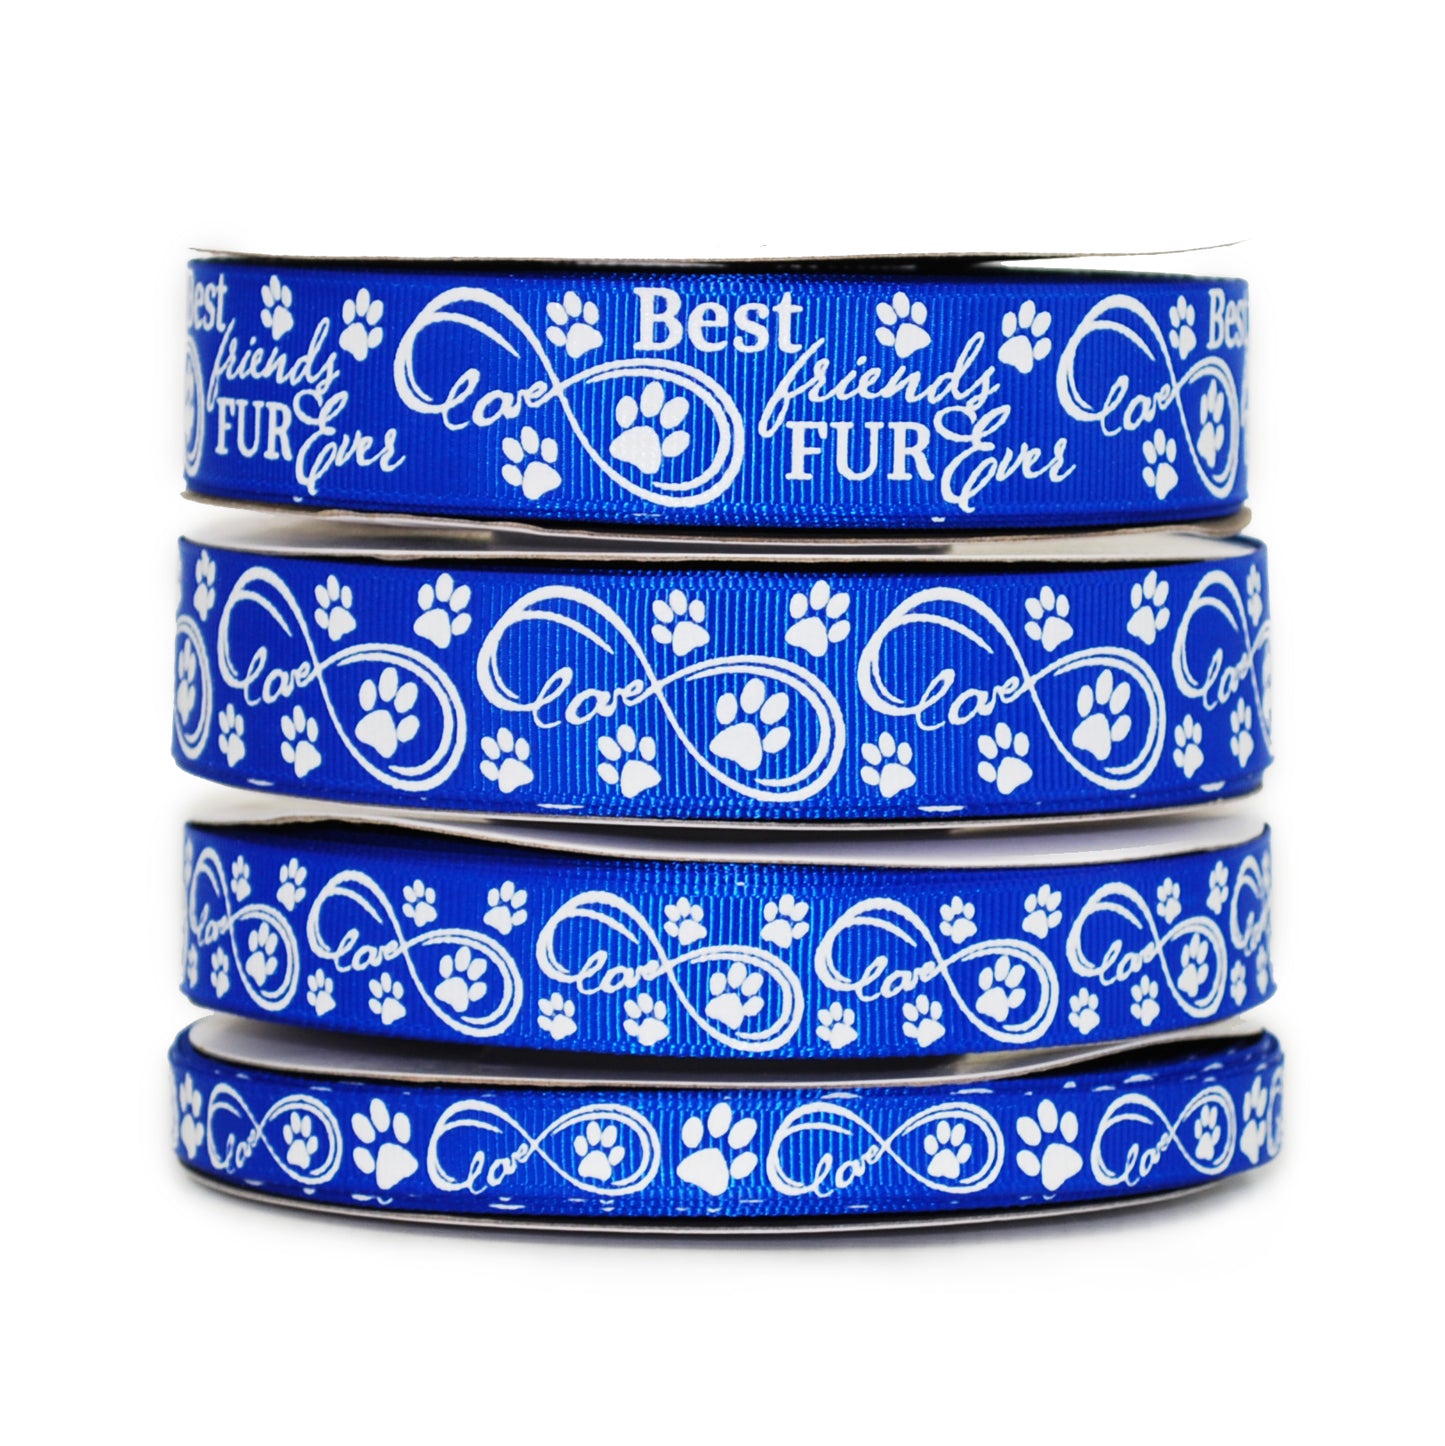 Best Friends Fur Ever Grosgrain Ribbon Collection On Electric Blue